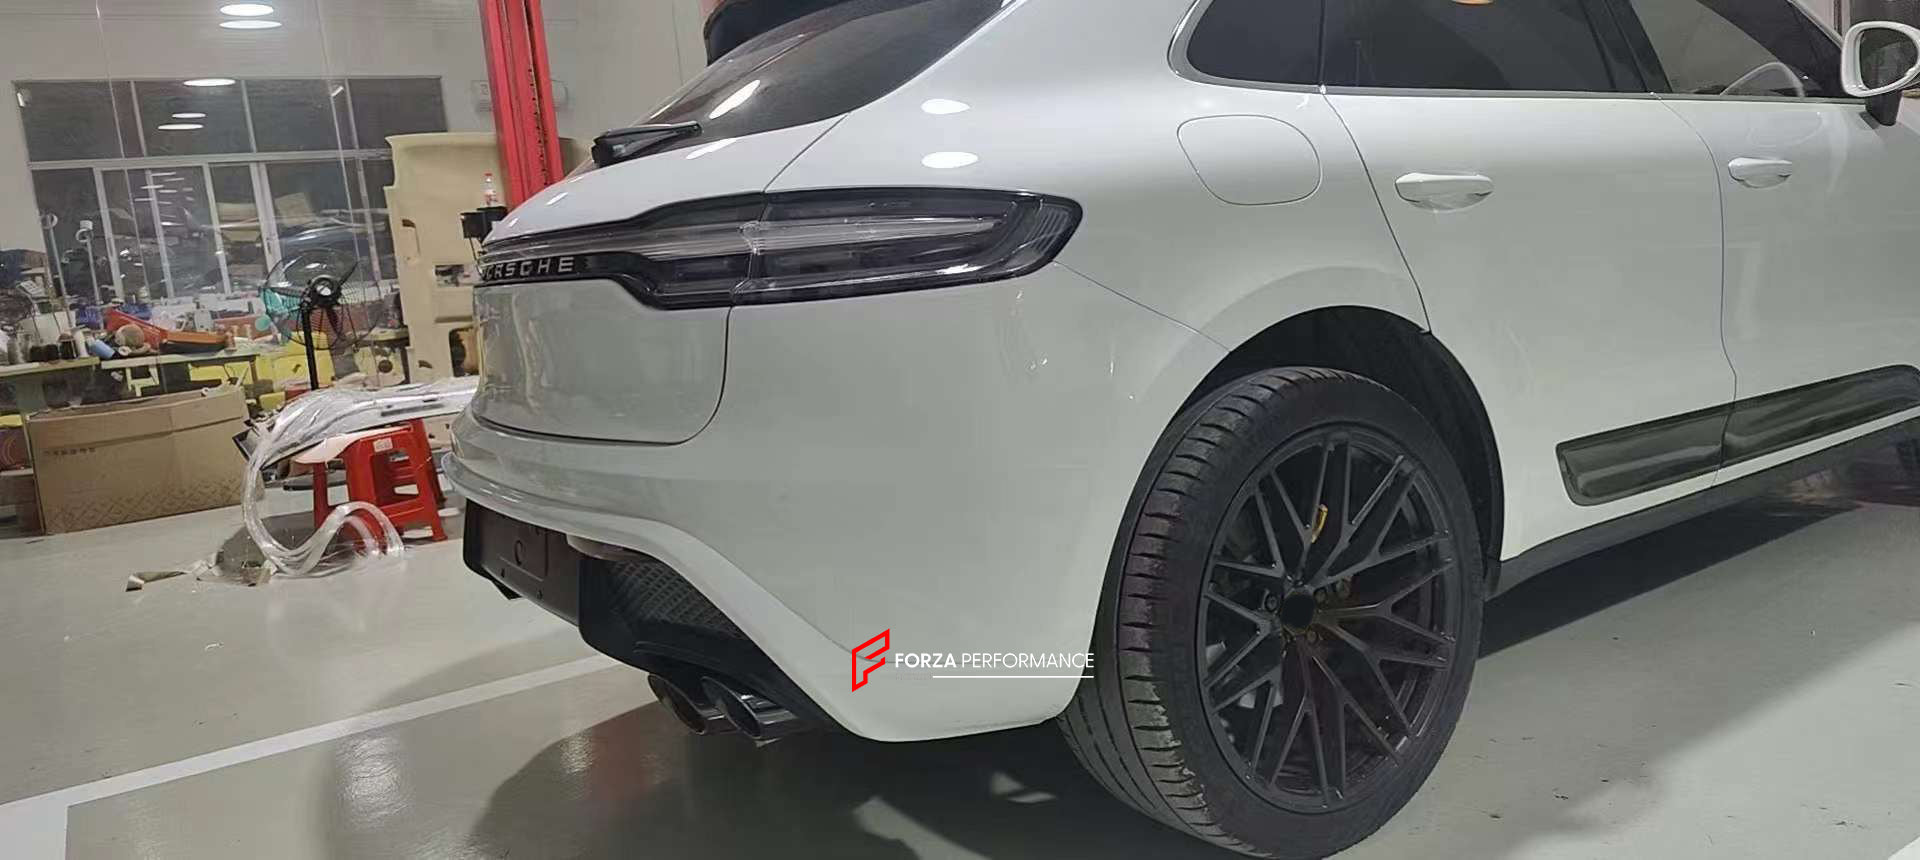 CONVERSION BODY KIT FOR PORSCHE MACAN 95B 2014-2018 UPGRADE TO 95B.2 T –  Forza Performance Group